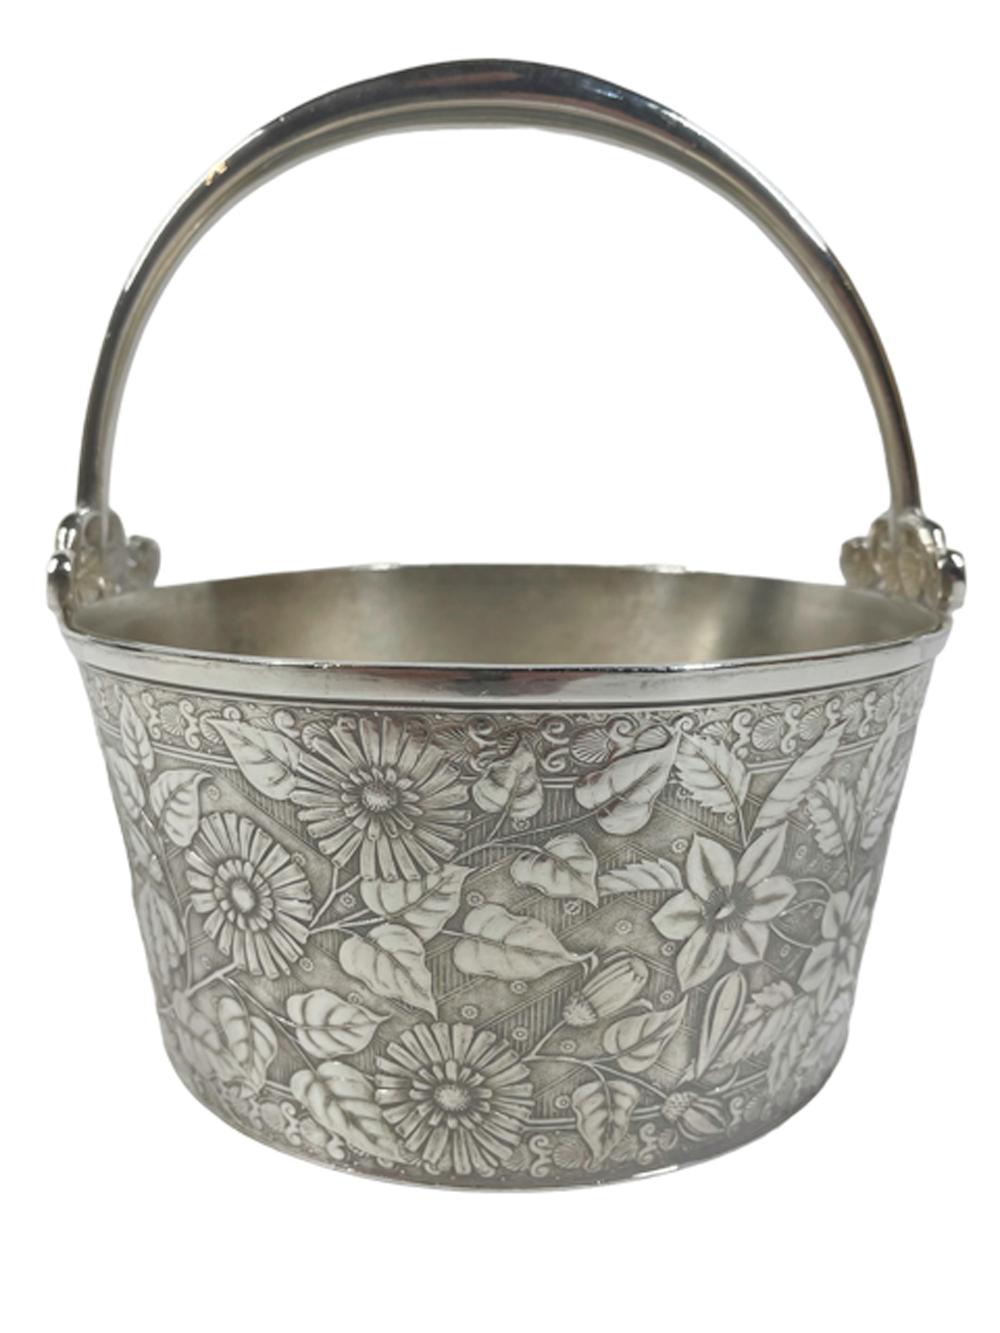 American Aesthetic Movement ice bucket in silver plate by Meridan. The tub form bucket with allover chrysanthemum pattern to the exterior and a removable strainer plate and fixed handle with scrolled leaf terminals.